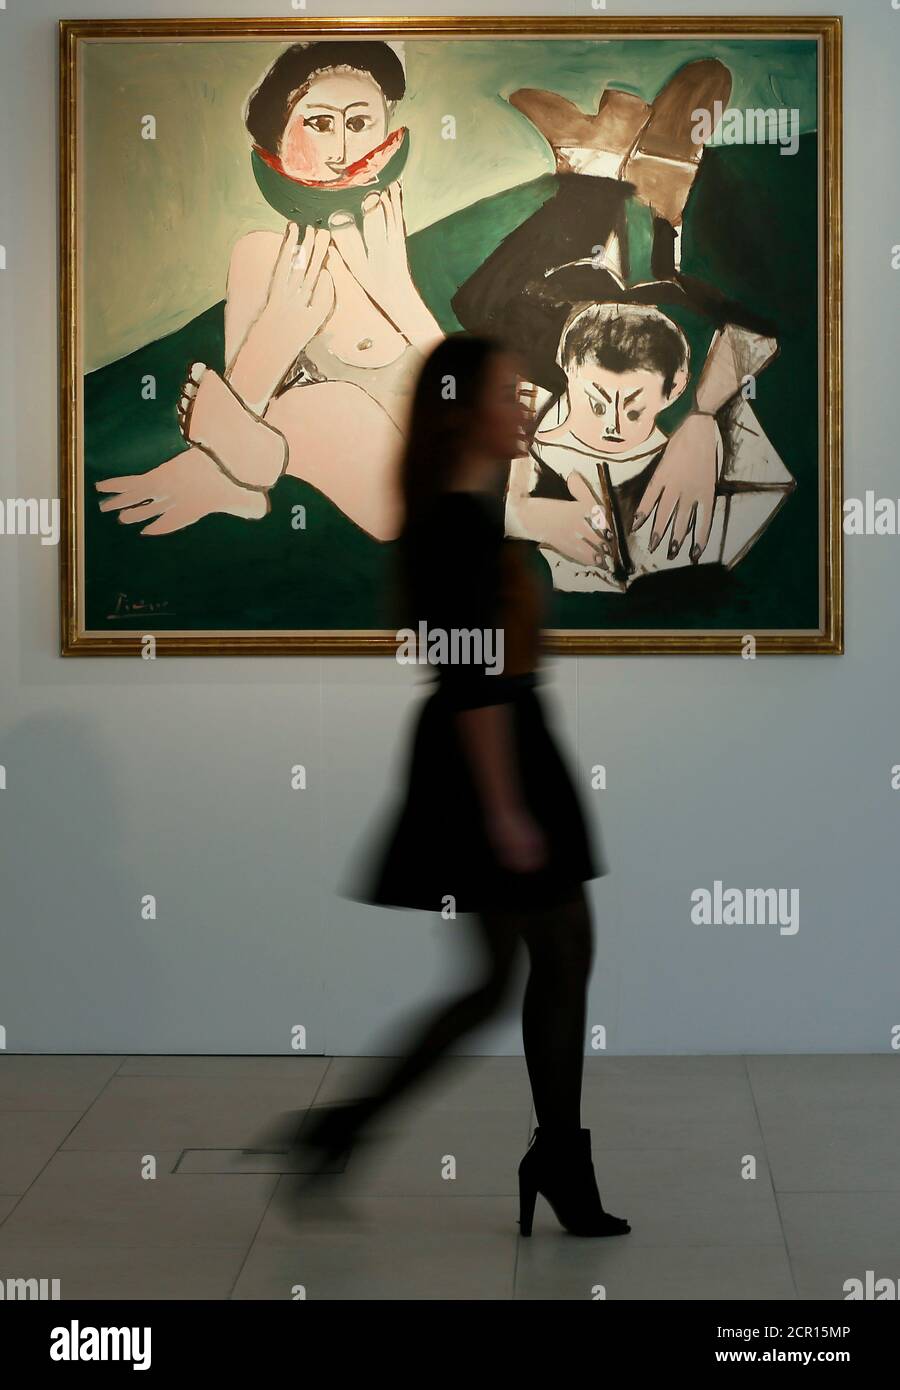 An employee poses with 'Mangeuse de pasteque et homme ecrivant' by Pablo Picasso from 1965, on display at Christie's auction house in London March 28, 2014. The painting is expected to earn 4.2-6 million GB pounds (7-10 million U.S. dollars) when auctioned in New York on May 6.  REUTERS/Stefan Wermuth (BRITAIN- Tags: ENTERTAINMENT BUSINESS) Stock Photo